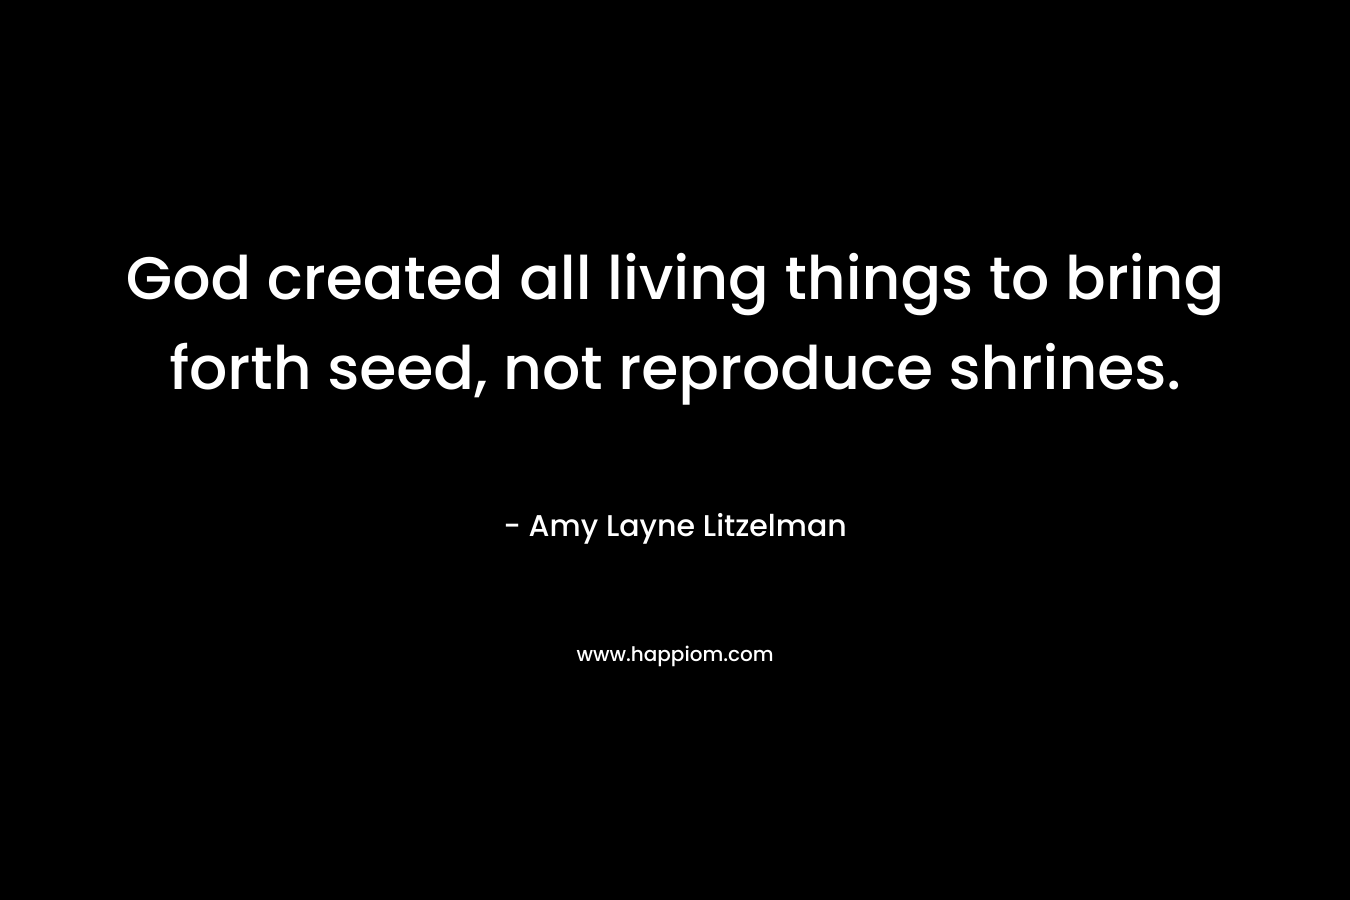 God created all living things to bring forth seed, not reproduce shrines.